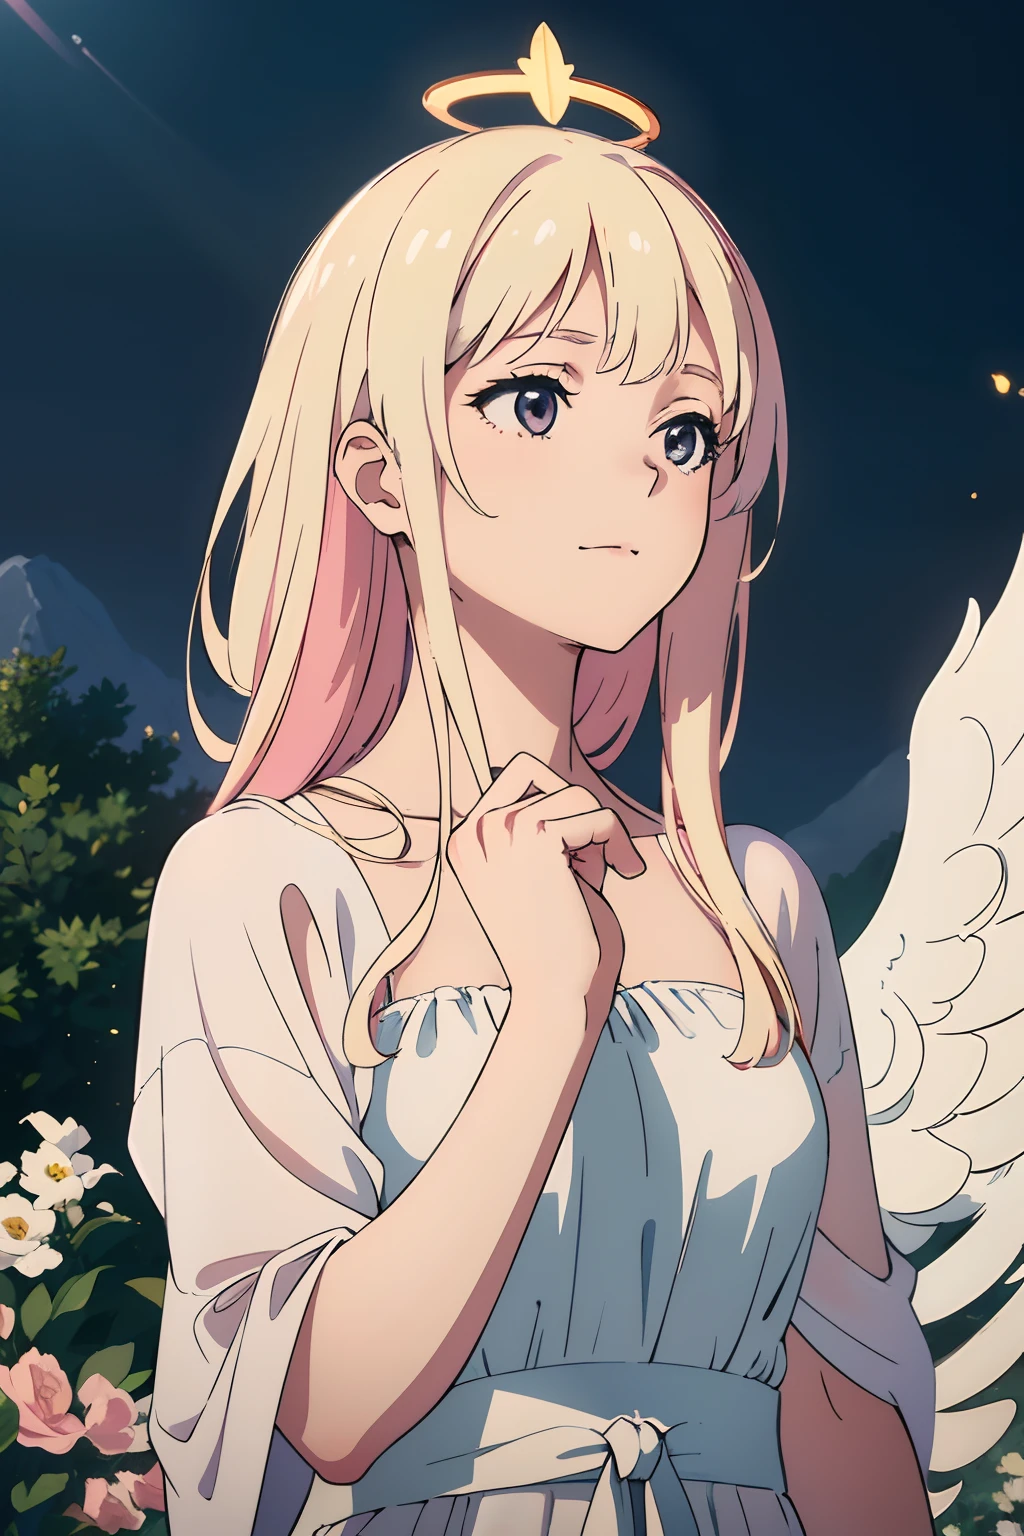 (best quality,4k,8k,highres,masterpiece:1.2),ultra-detailed,(realistic,photorealistic,photo-realistic:1.37),angelic,beautiful detailed wings,colorful celestial light and stars,ethereal moonlit garden,heavenly figure,sparkling halo,gentle smile,flowing white gown,peaceful expression,soft and serene atmosphere,faint mist and soft glow,vivid colors,soft pastel colors,dreamlike,ethereal,half moon,peaceful,golden light,delicate complexion,carefully crafted details,graceful pose,silky hair flowing in the breeze,majestic celestial scenery,surreal beauty,harmony with nature,detailed textures,subtle shadows,sublime scenery,supernatural grace,divine presence,mystical allure,ethereal charm,heavenly messenger